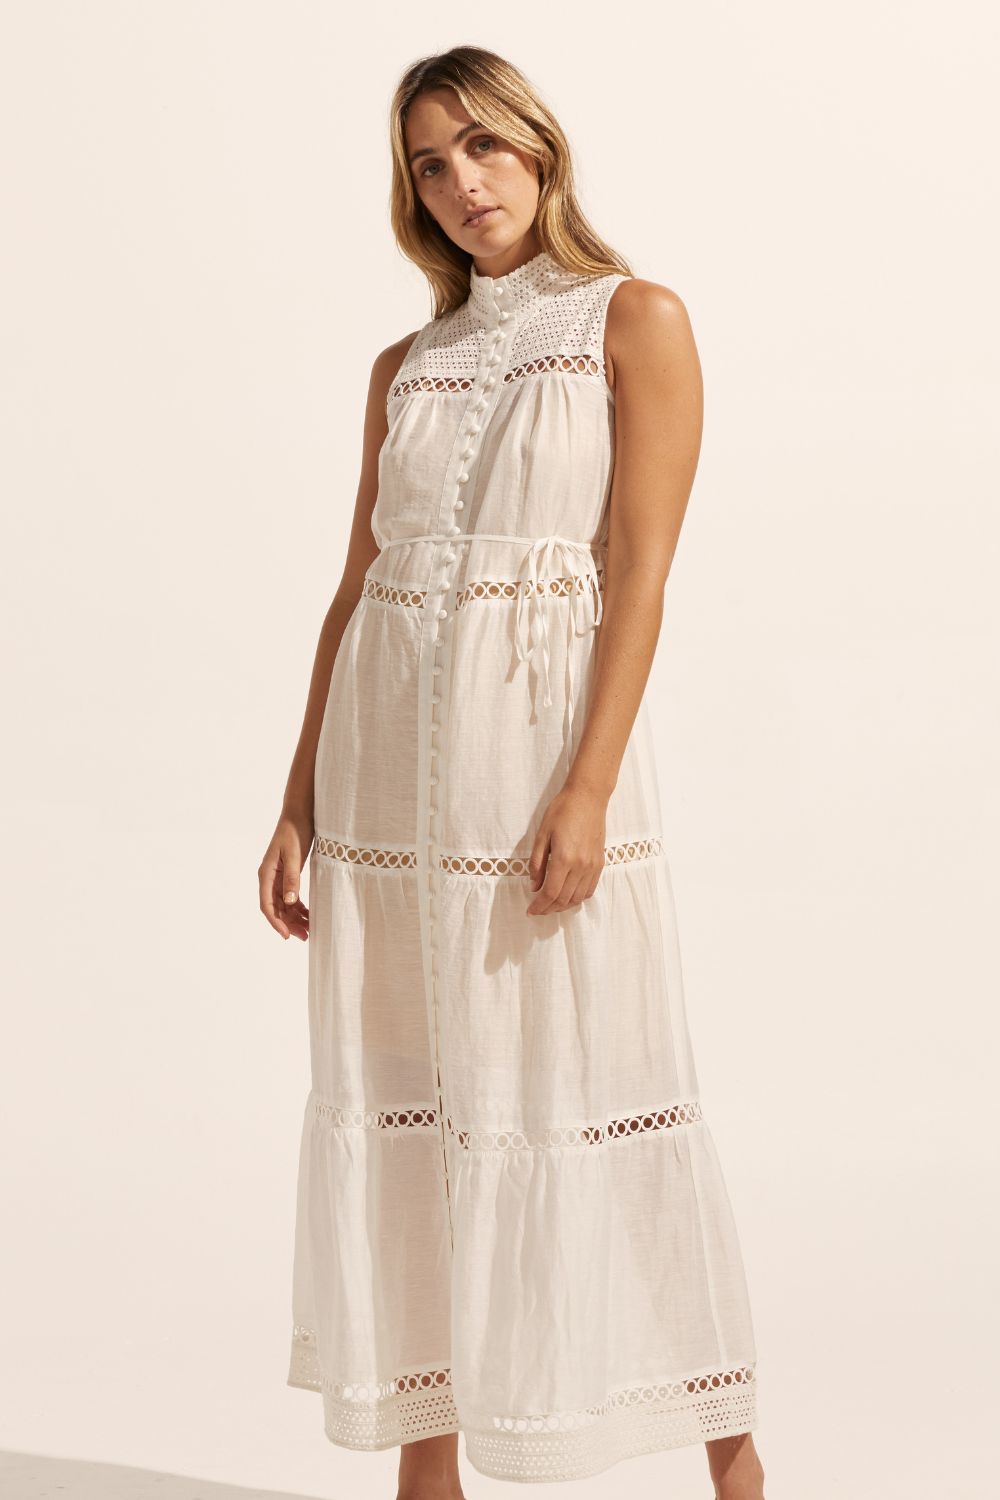 white, maxi dress, sleeveless, button down centre, high neck, circular lace design, self tie fabric belt, front image